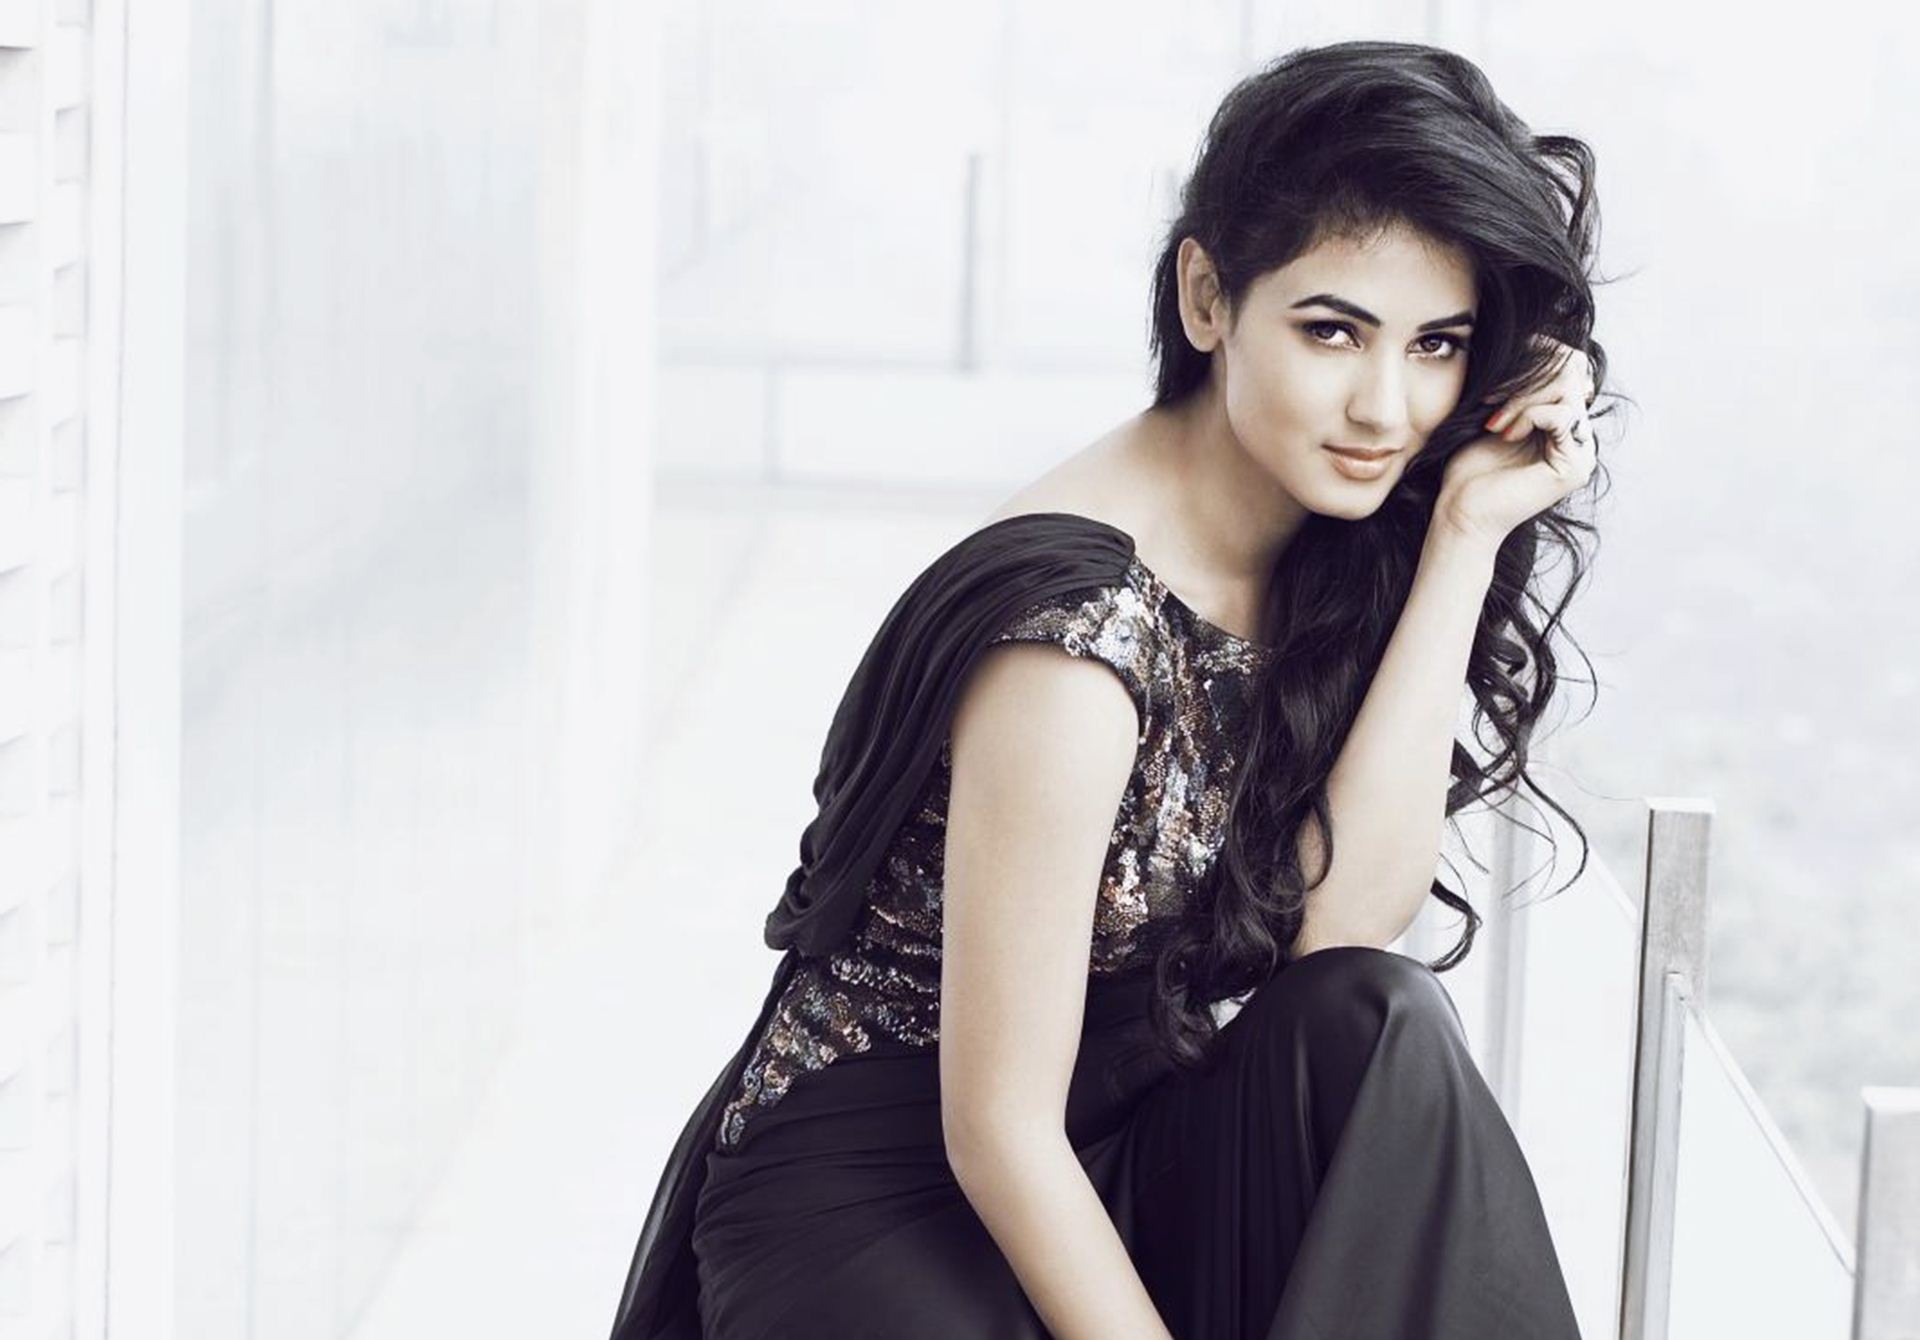 Sonal Chauhan Backgrounds, Compatible - PC, Mobile, Gadgets| 1920x1340 px